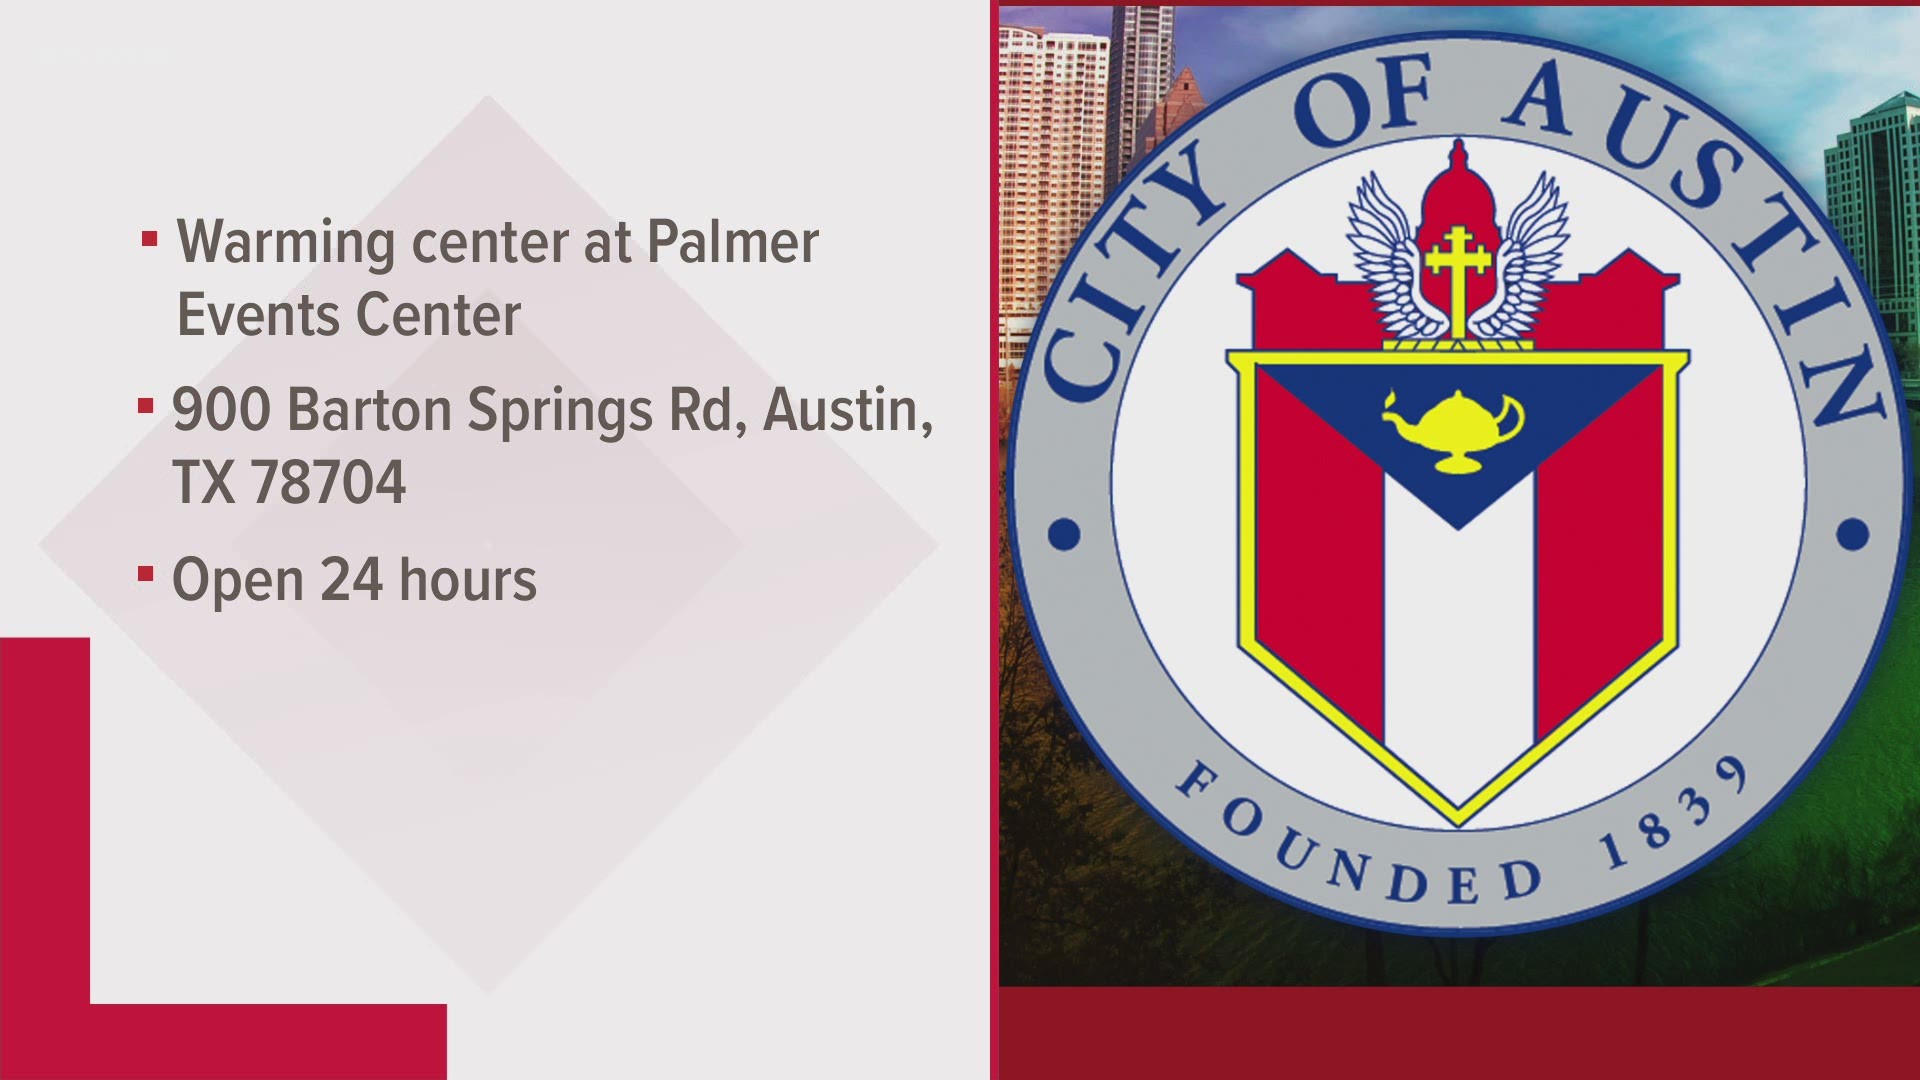 Austin's Palmer Events Center is being used as a warming center amid extremely cold temperatures. COVID-19 protocols are in place.